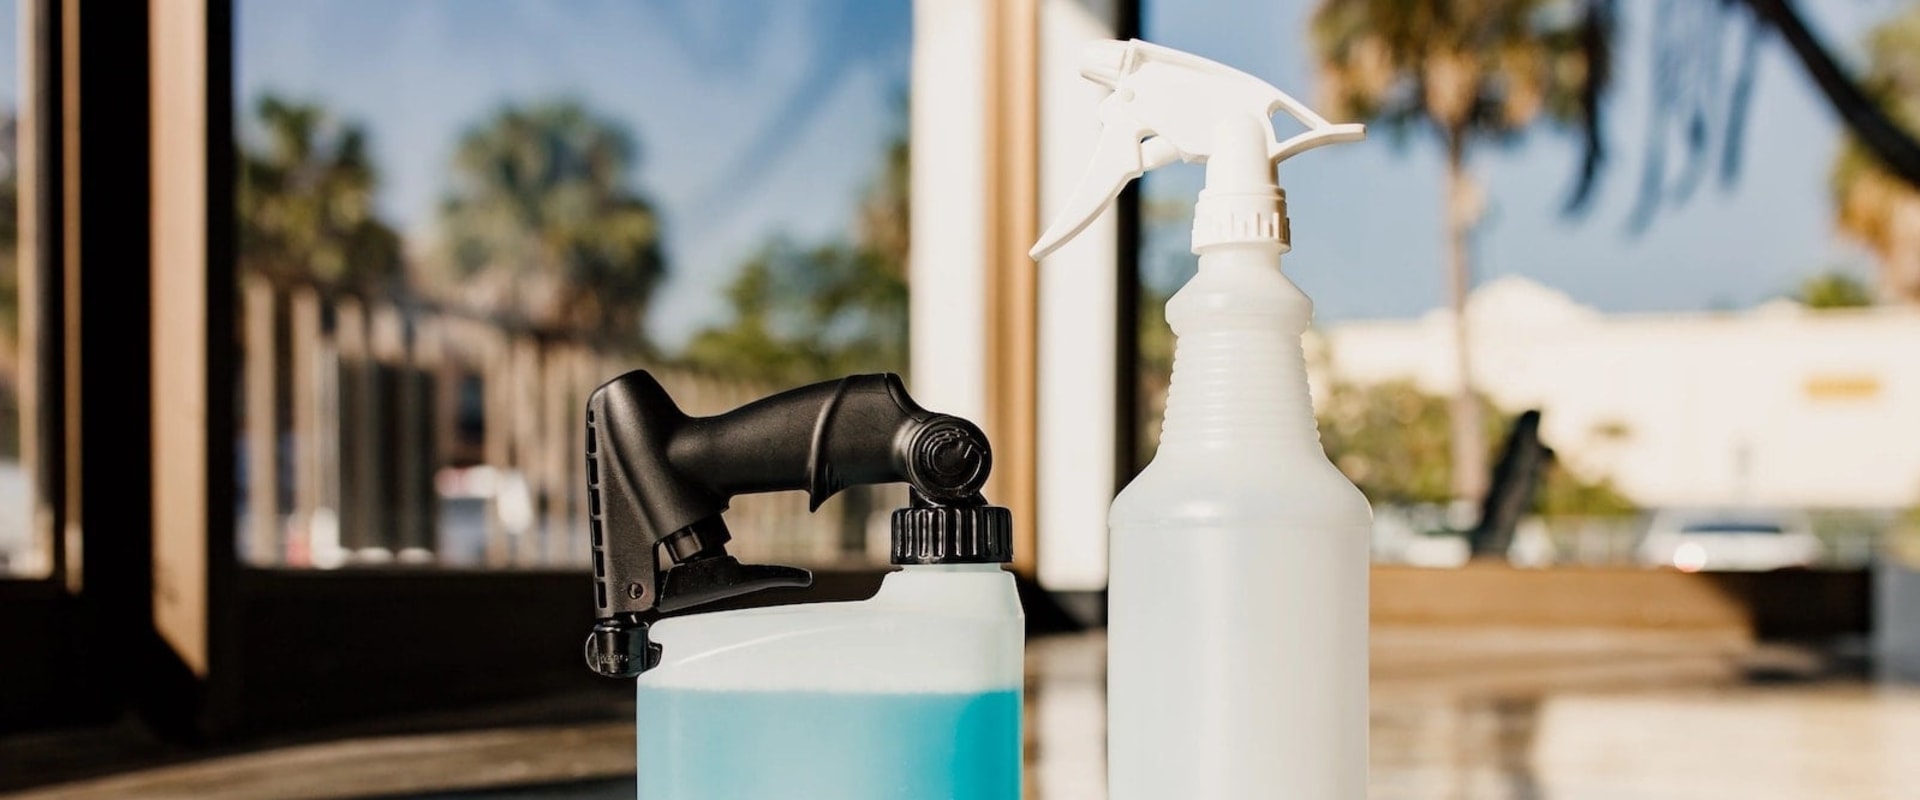 Spray Bottles: Everything You Need to Know